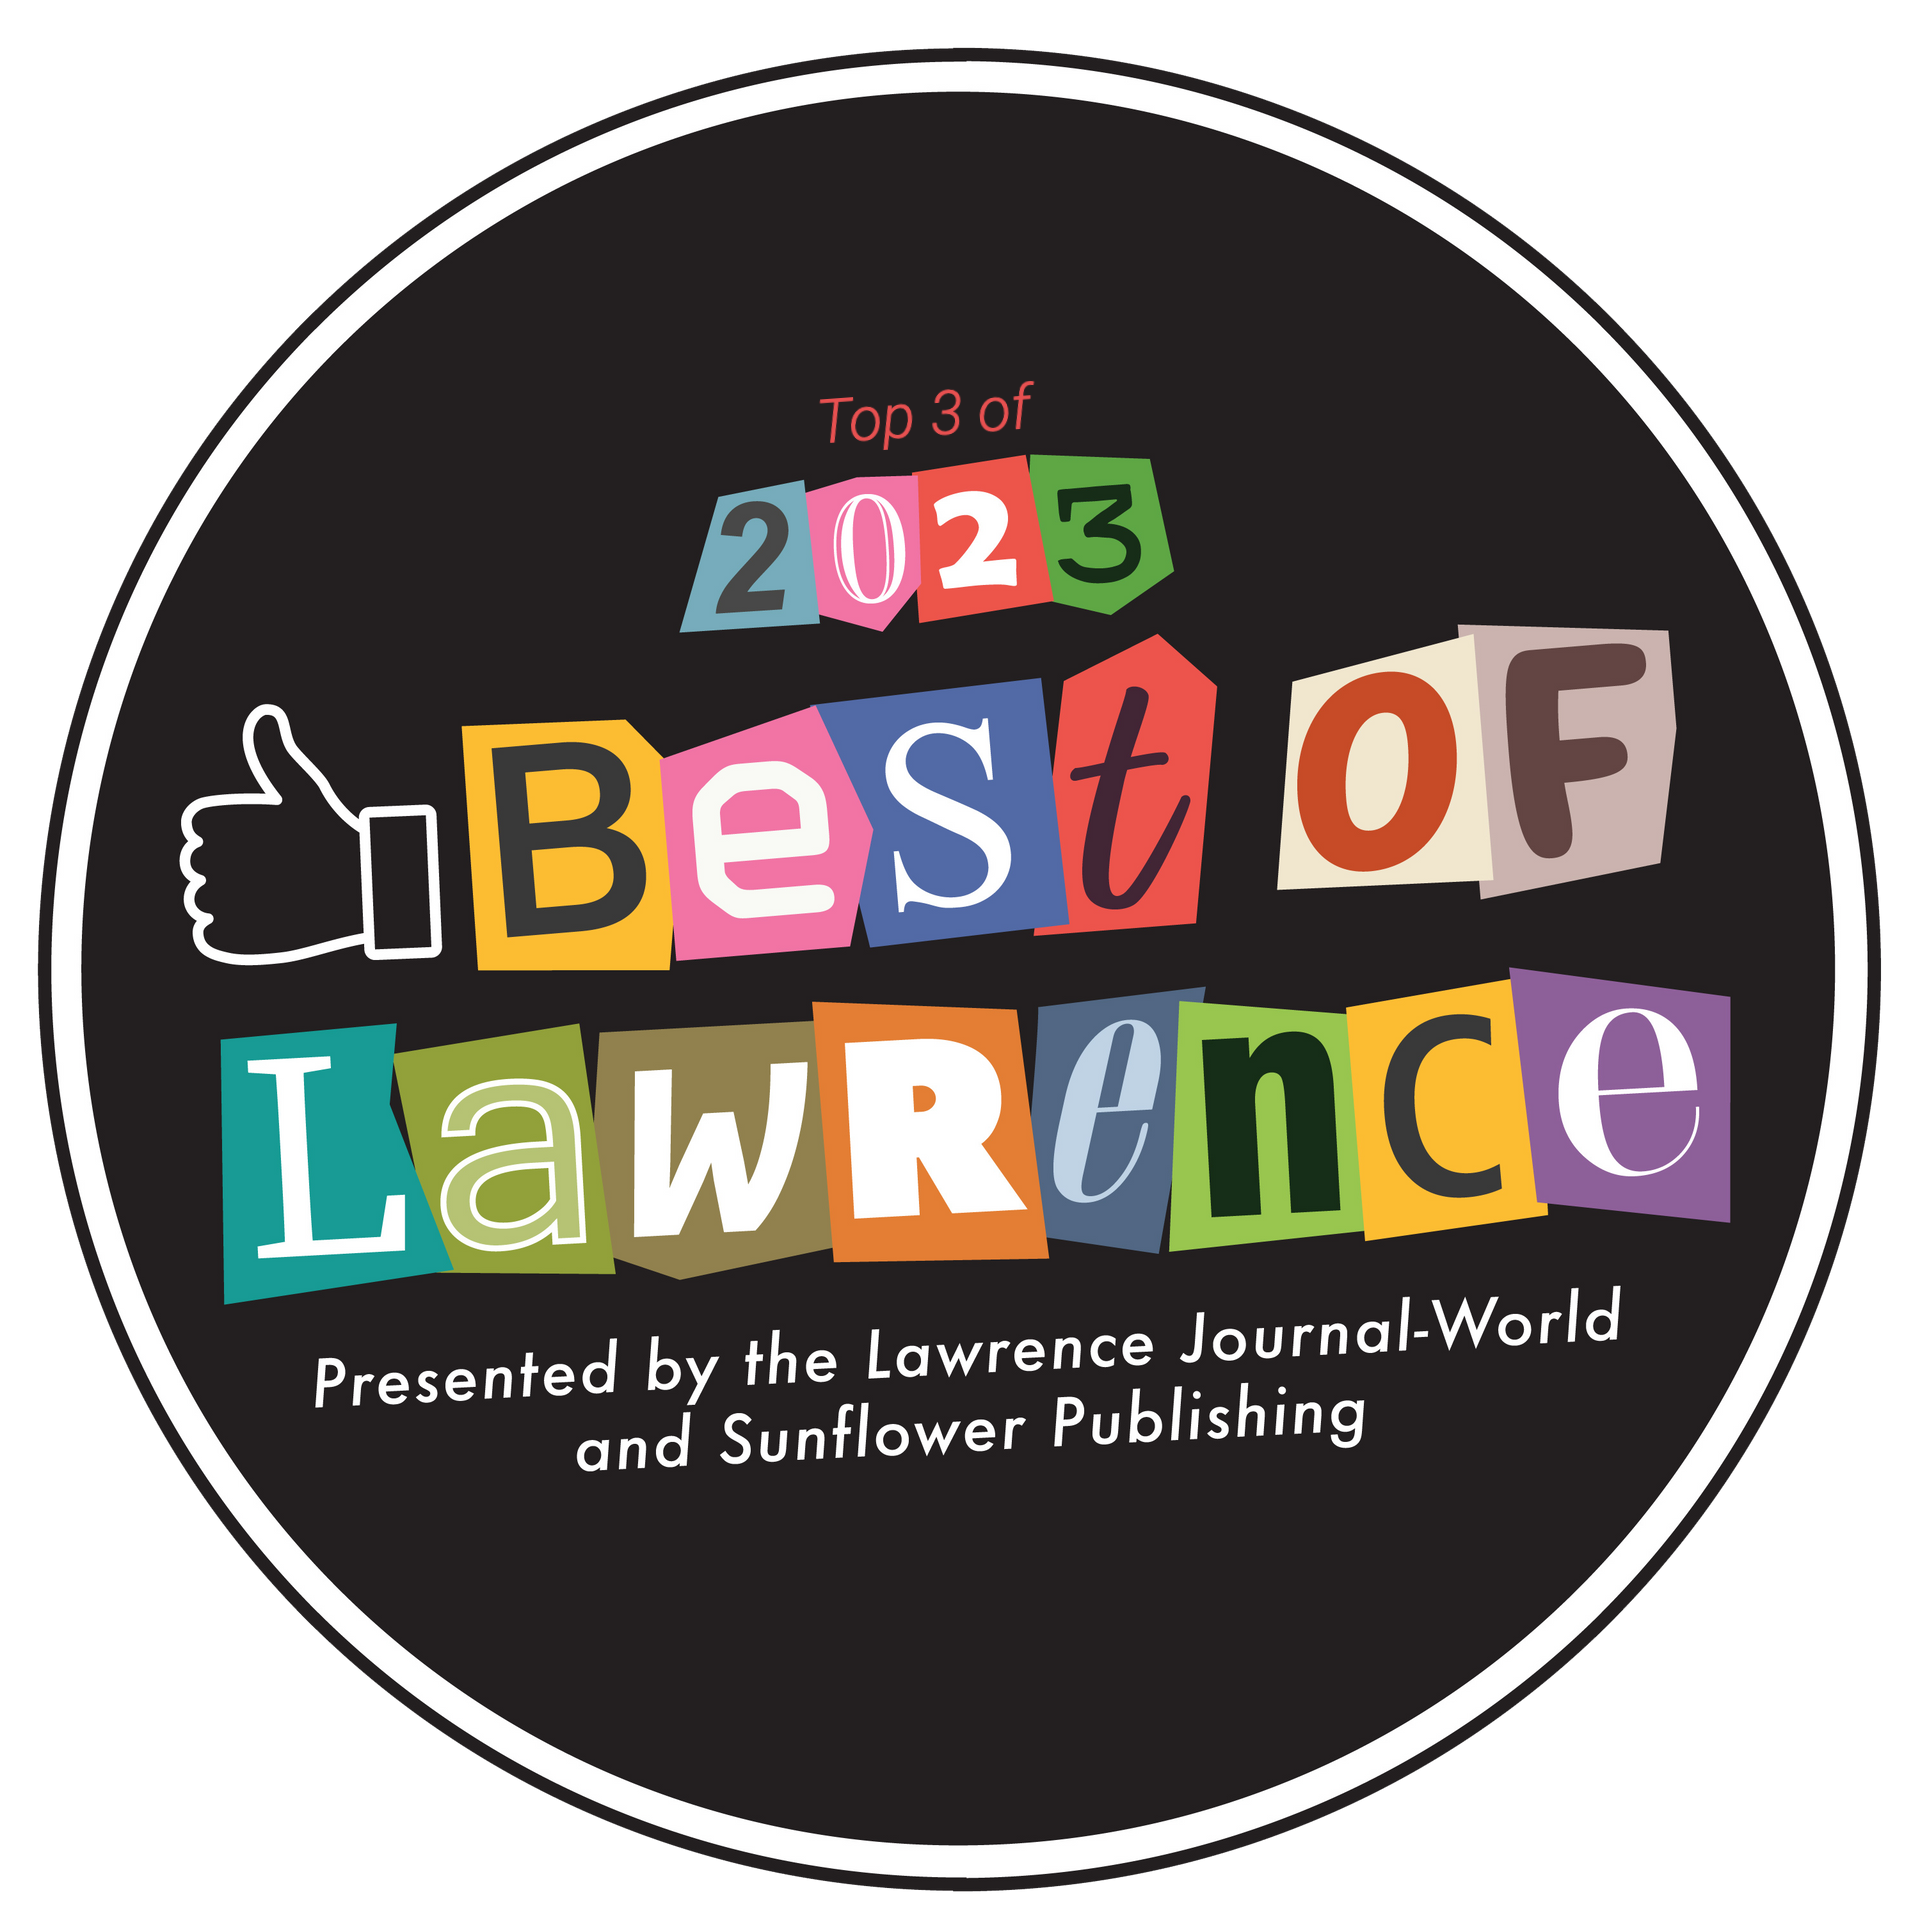 A logo for the best of lawrence presented by the lawrence journal world and sunflower publishing